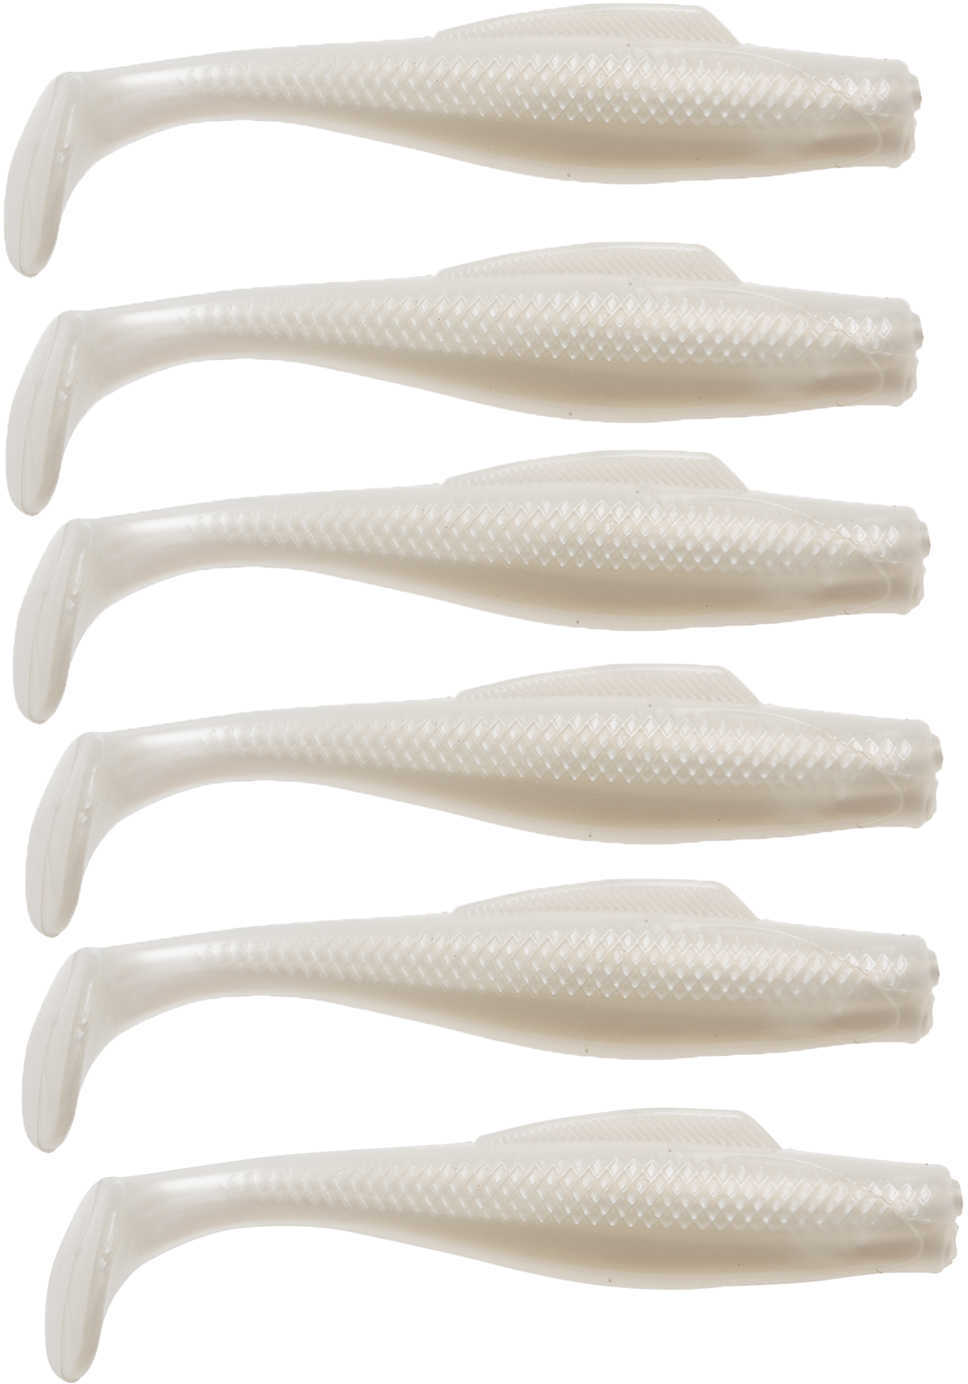 Z-Man Minniowz Soft Plastic Lures 3" Length, Pearl, Package of 6